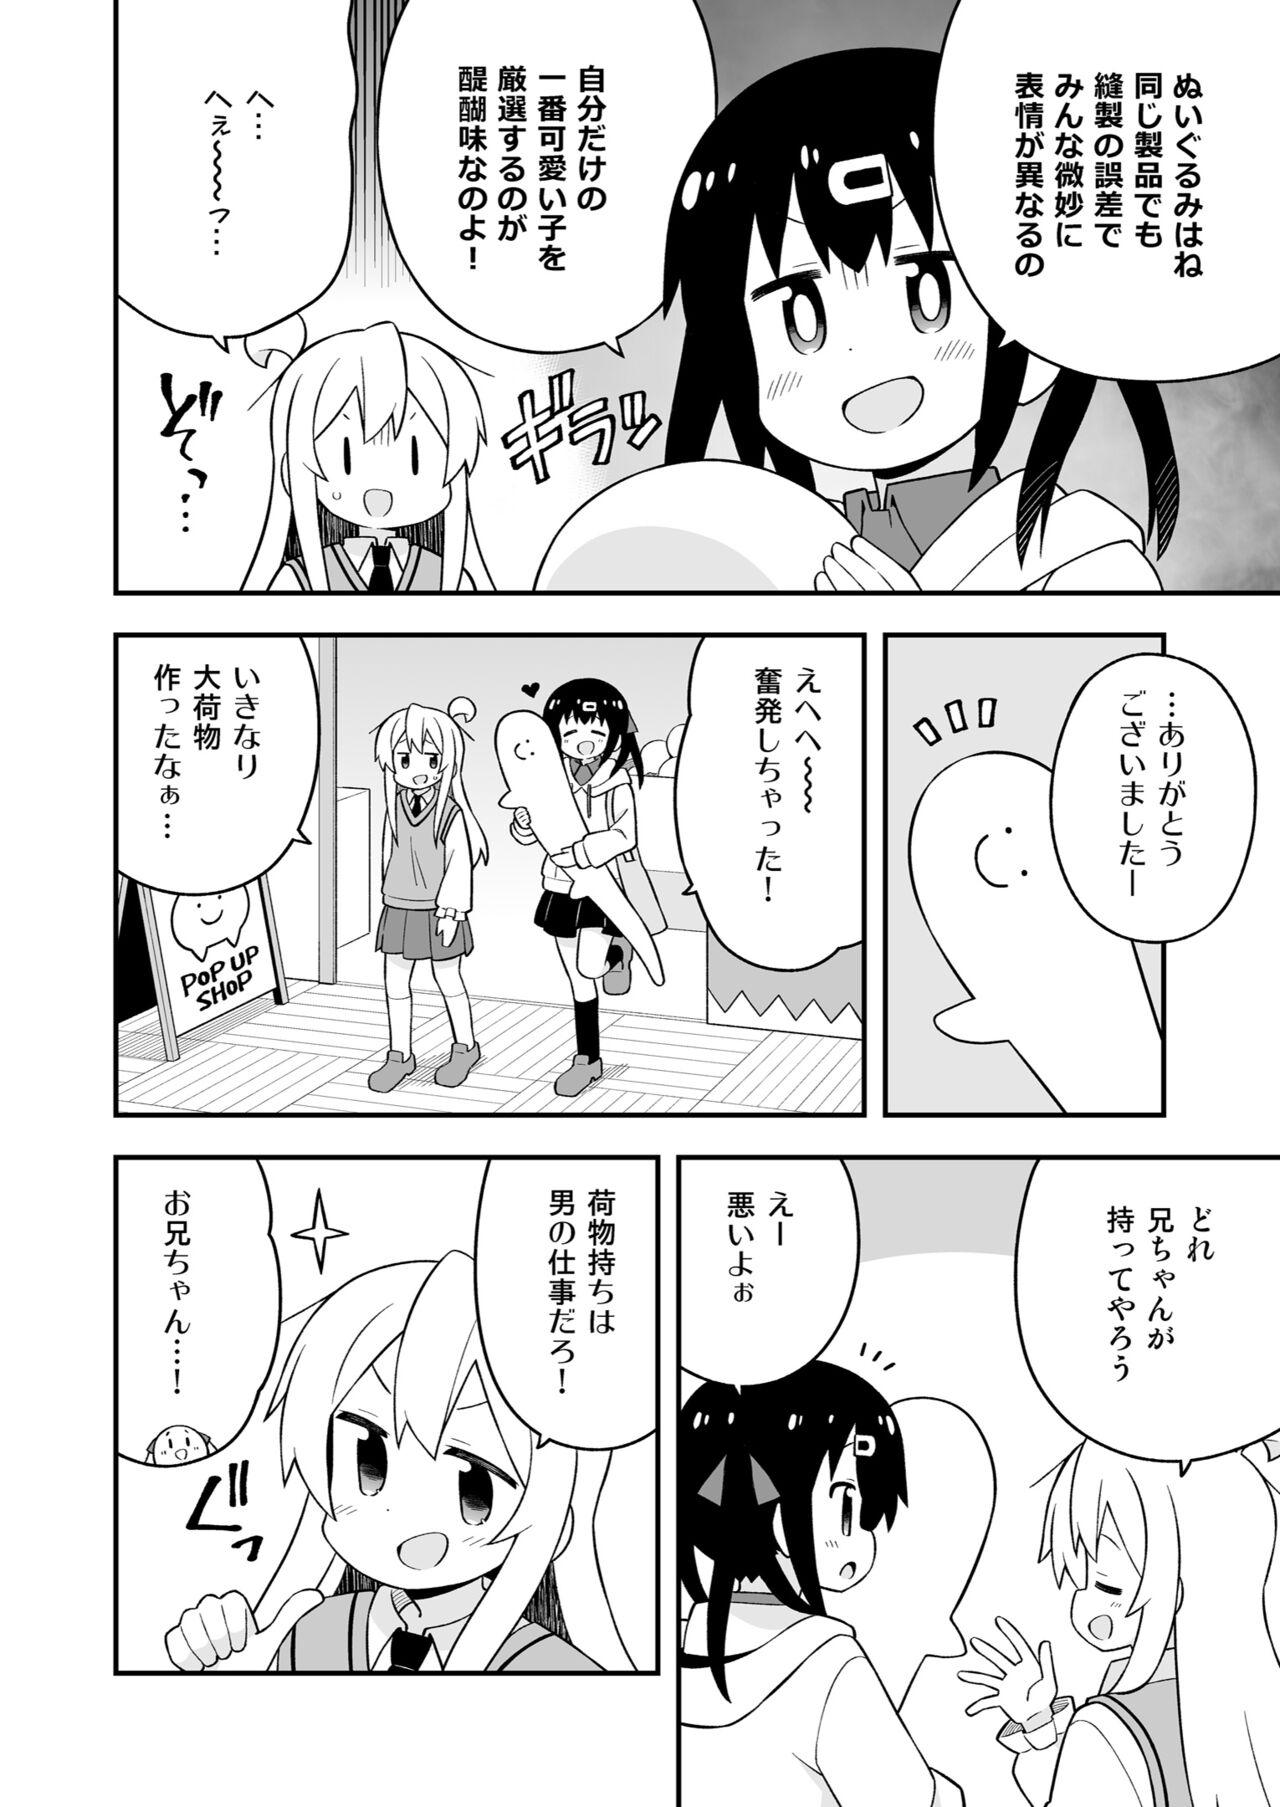 Long Onii-chan wa Oshimai! 23 - Onii chan wa oshimai Naturaltits - Page 6